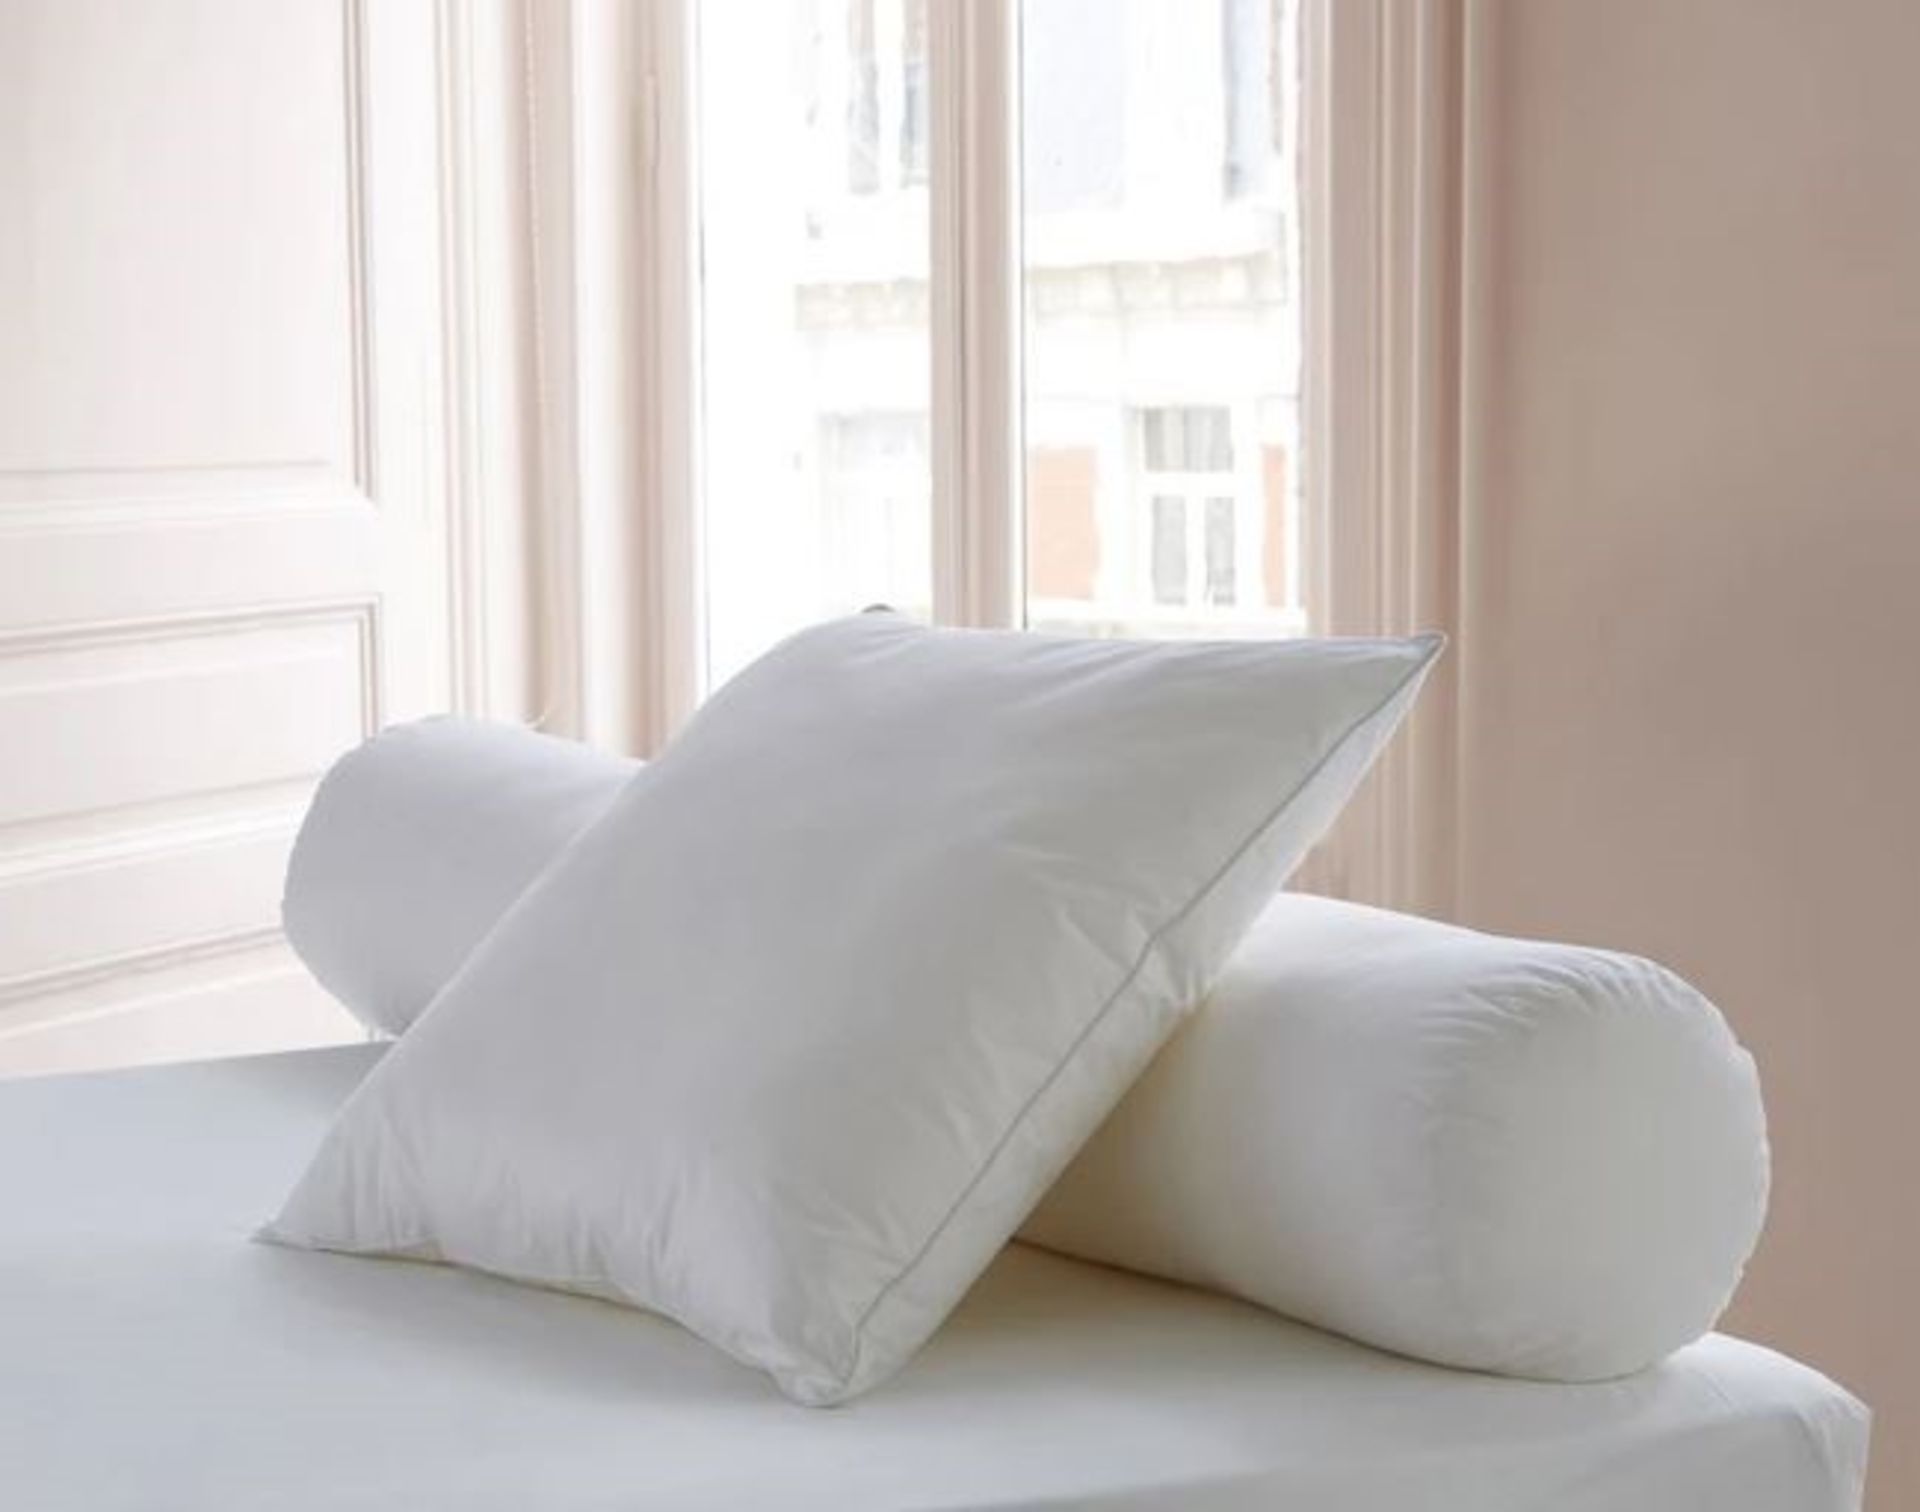 1 BAGGED GRADE A, LESTRA OREILLER SYNTHETIC ESSENTIAL PILLOW IN WHITE / RRP £42.00 (PUBLIC VIEWING